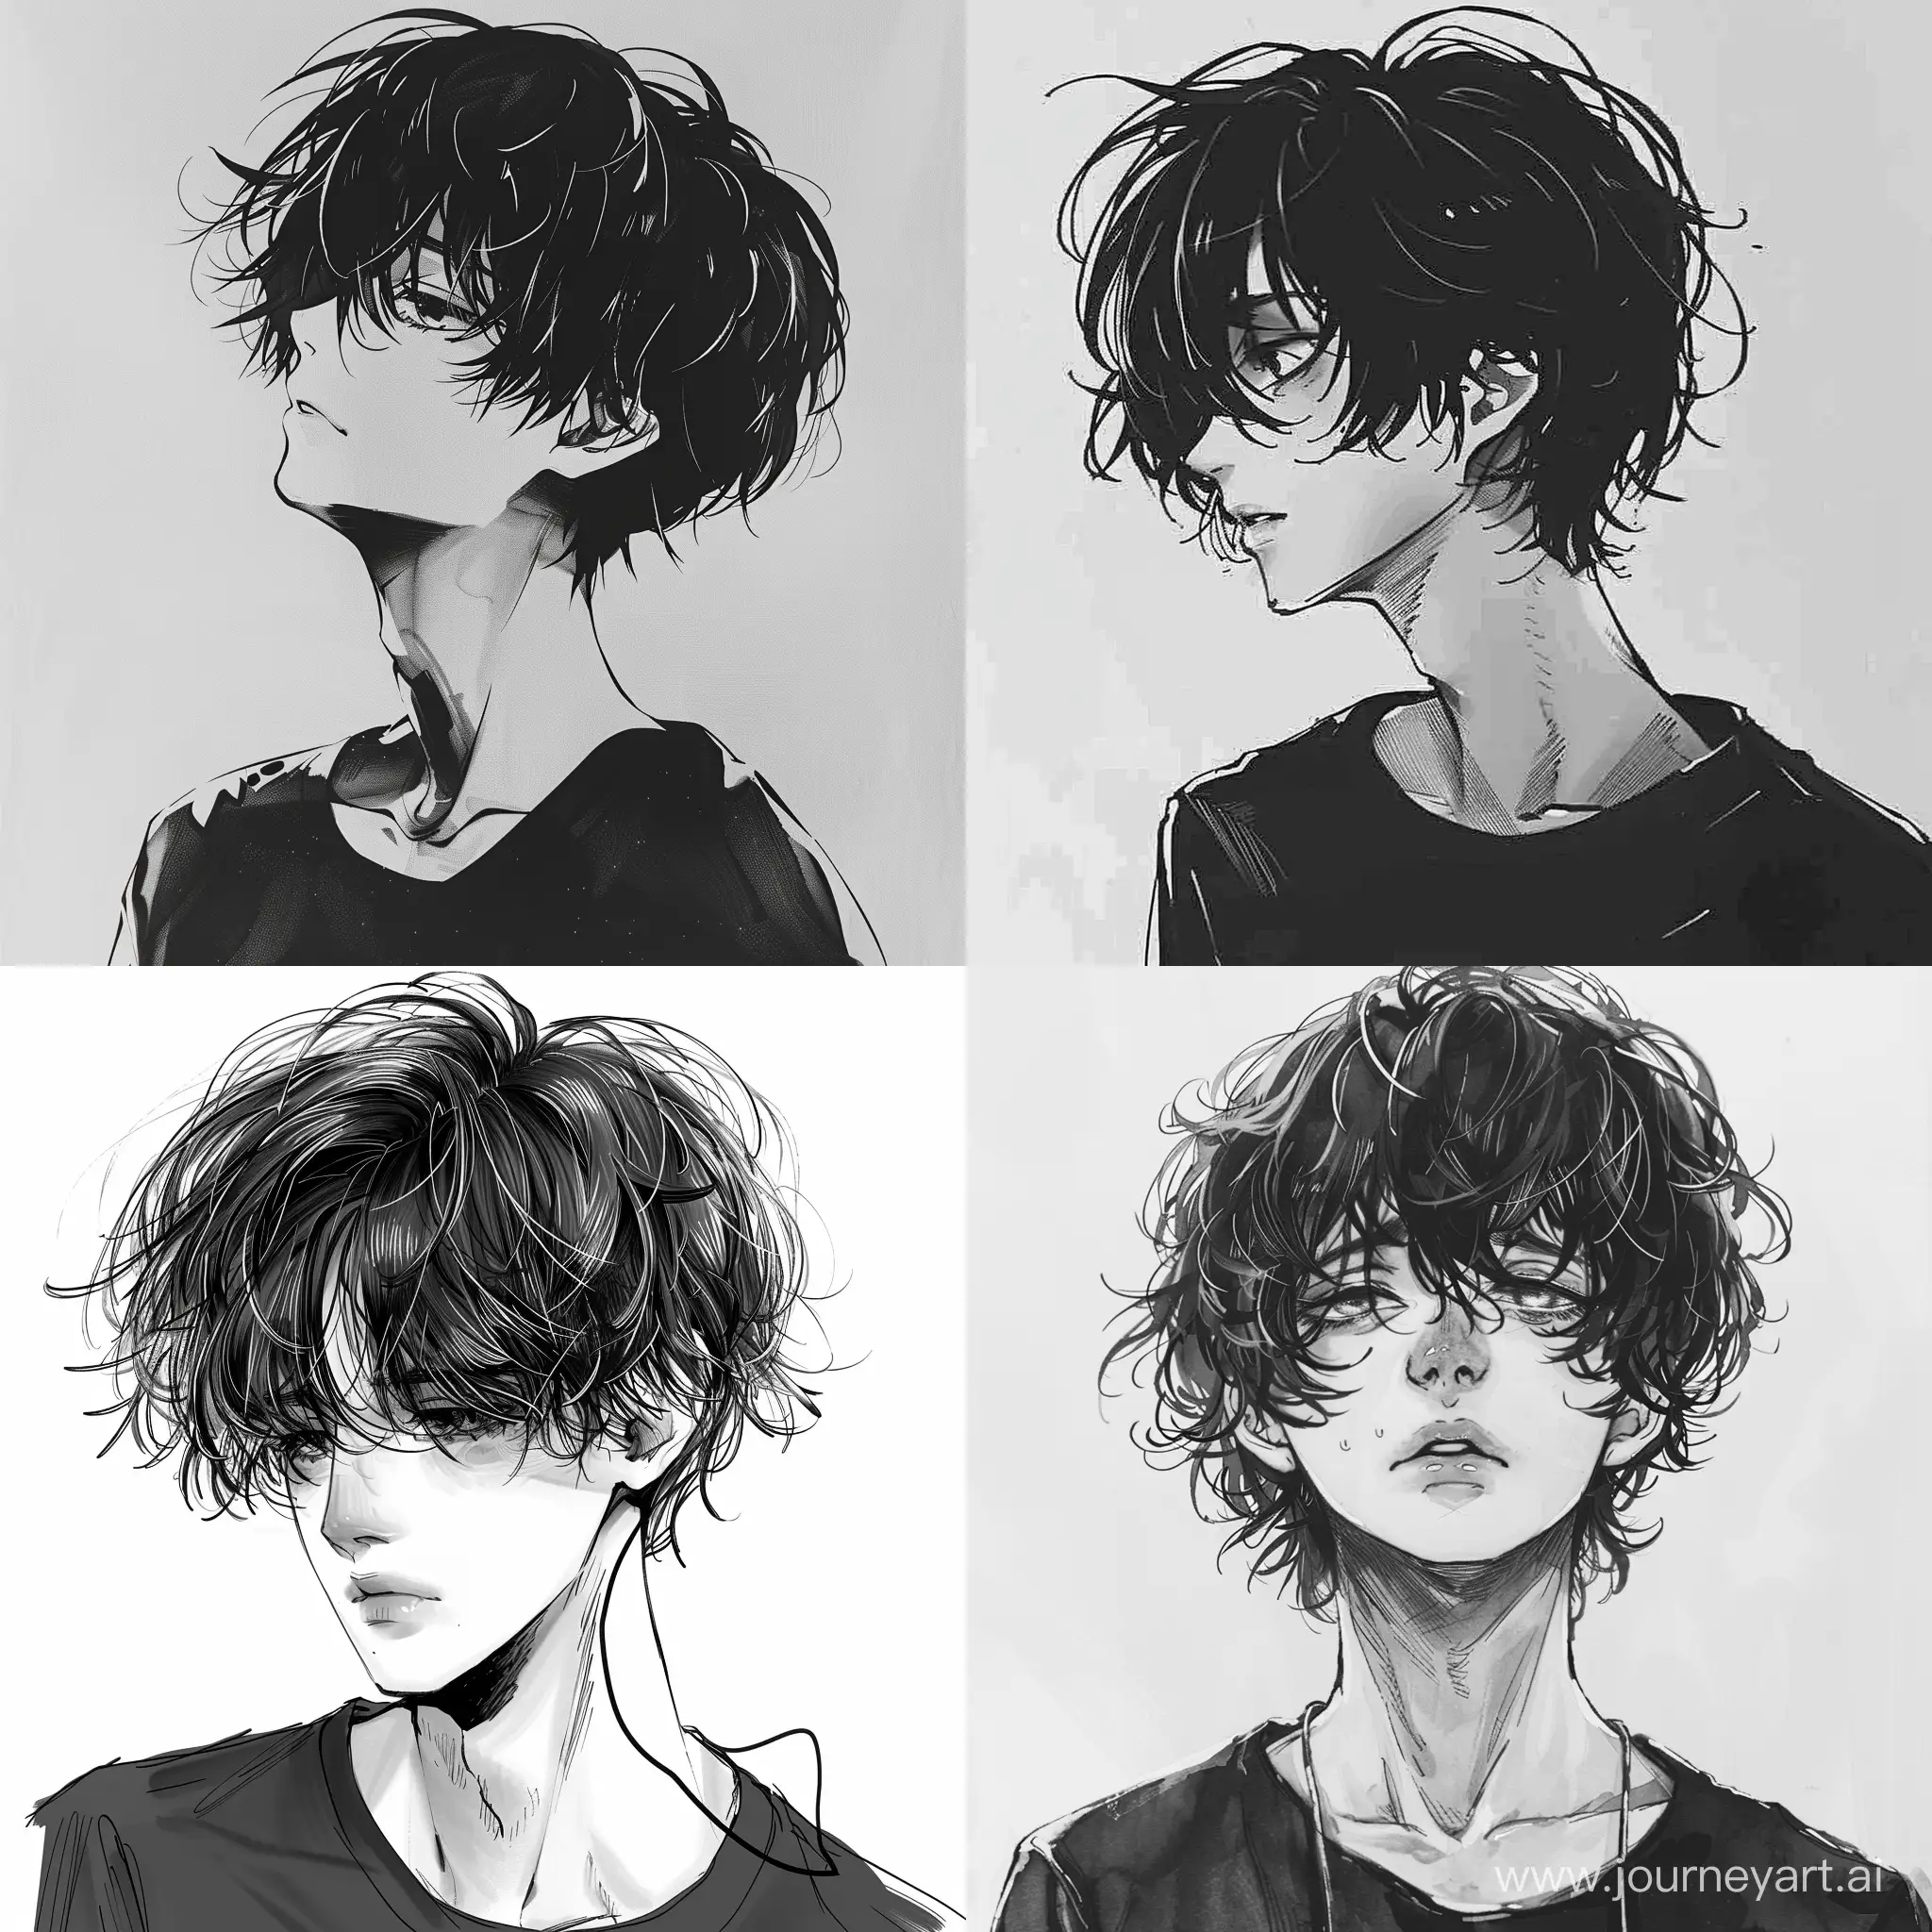 AnimeInspired-Portrait-of-a-23YearOld-Man-with-Unstyled-Hair-in-Monochrome